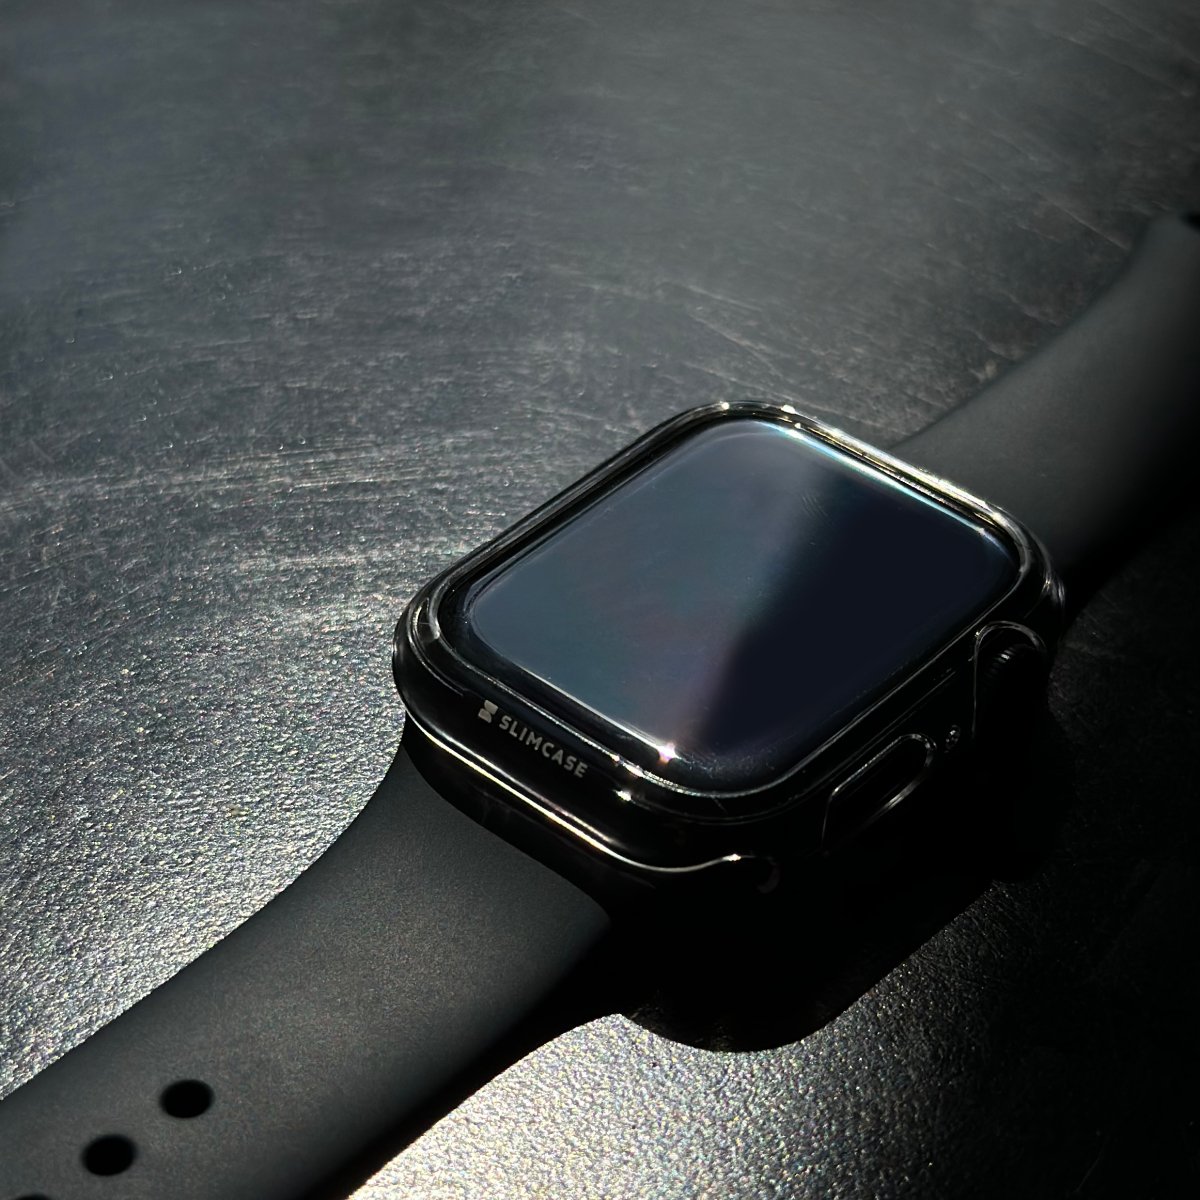 Slimcase for Apple Watch Series 7 / 8 - Slimcase IndiaCase